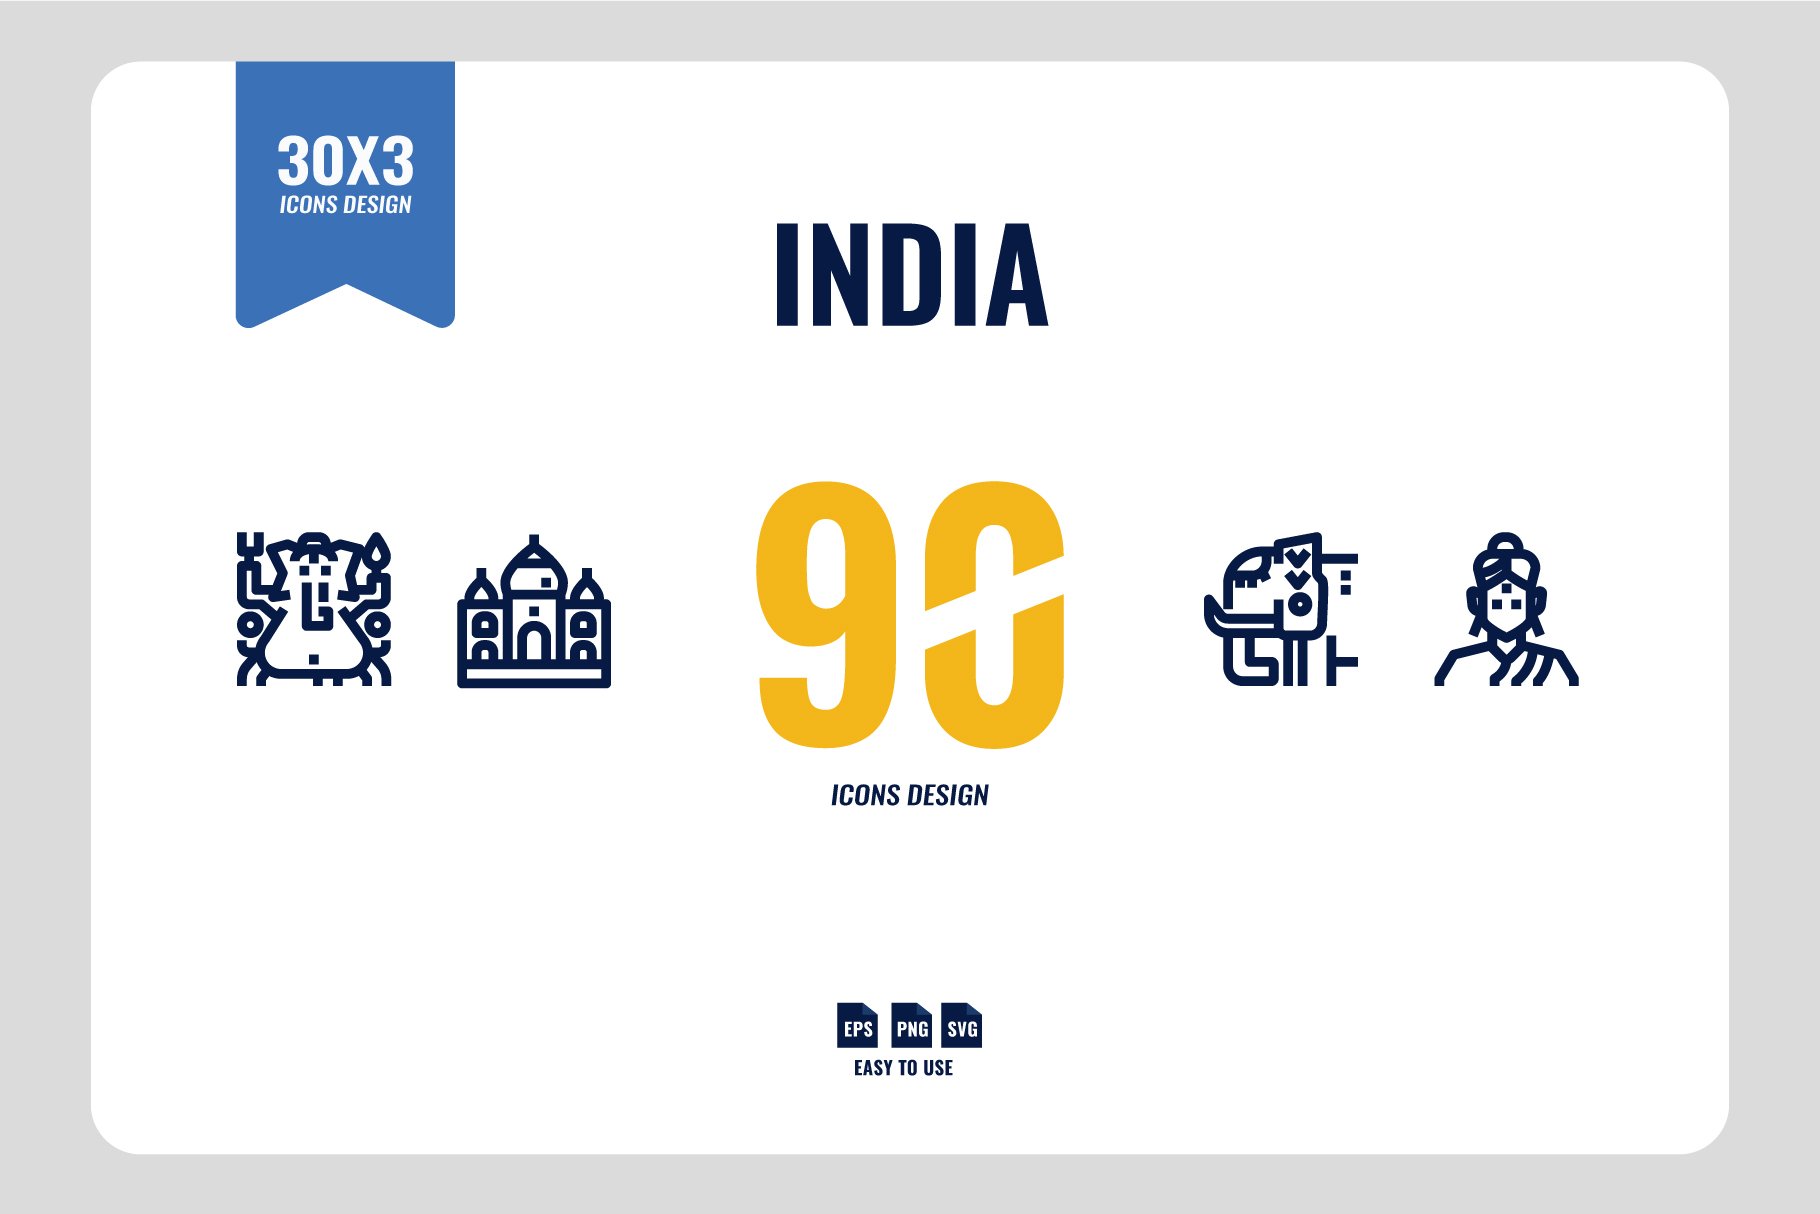 INDIA 90 Icons cover image.